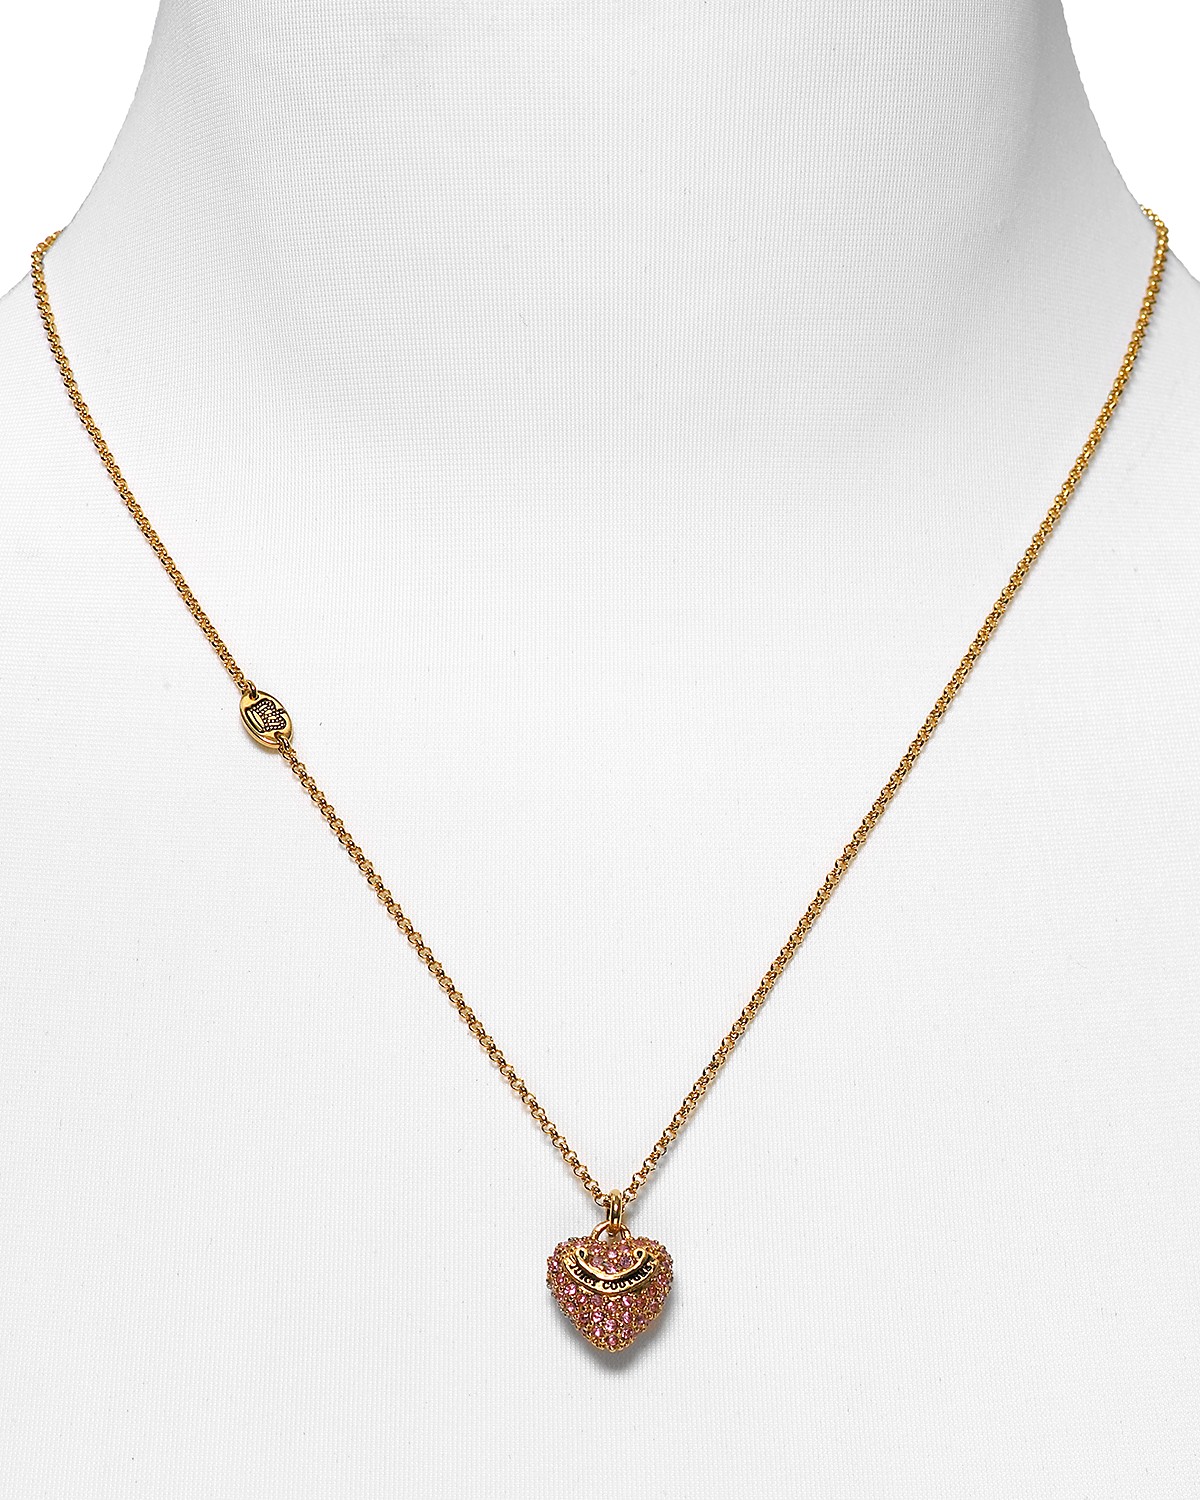 The Chic Sac Juicy Couture Pave Heart Necklace